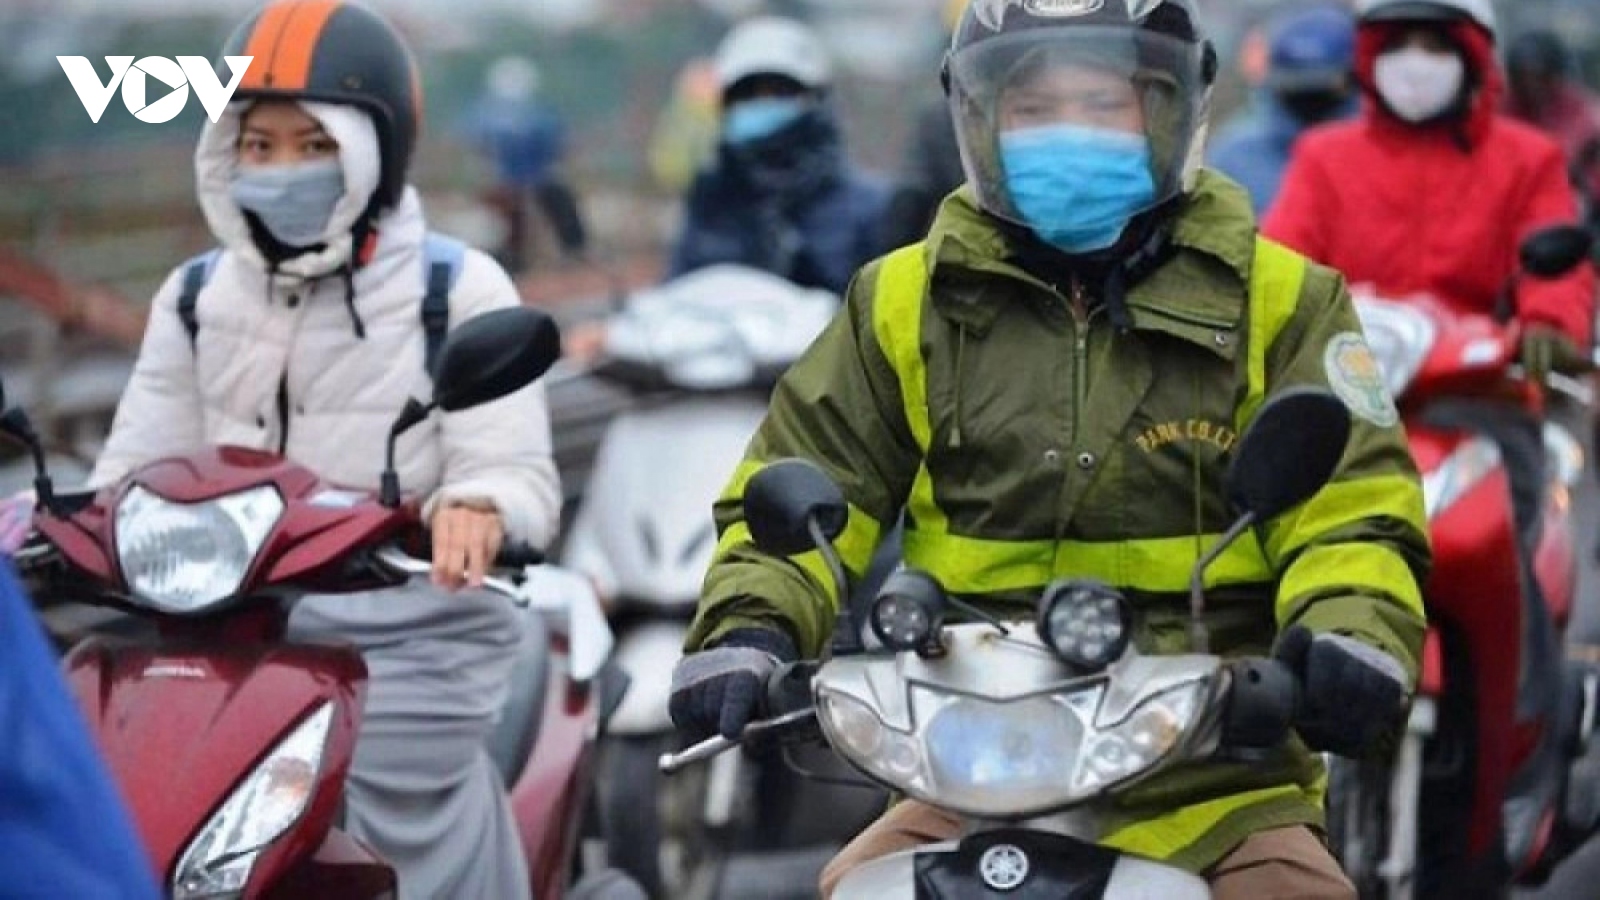 Severe cold to hit northern Vietnam this week, temperatures to fall sharply